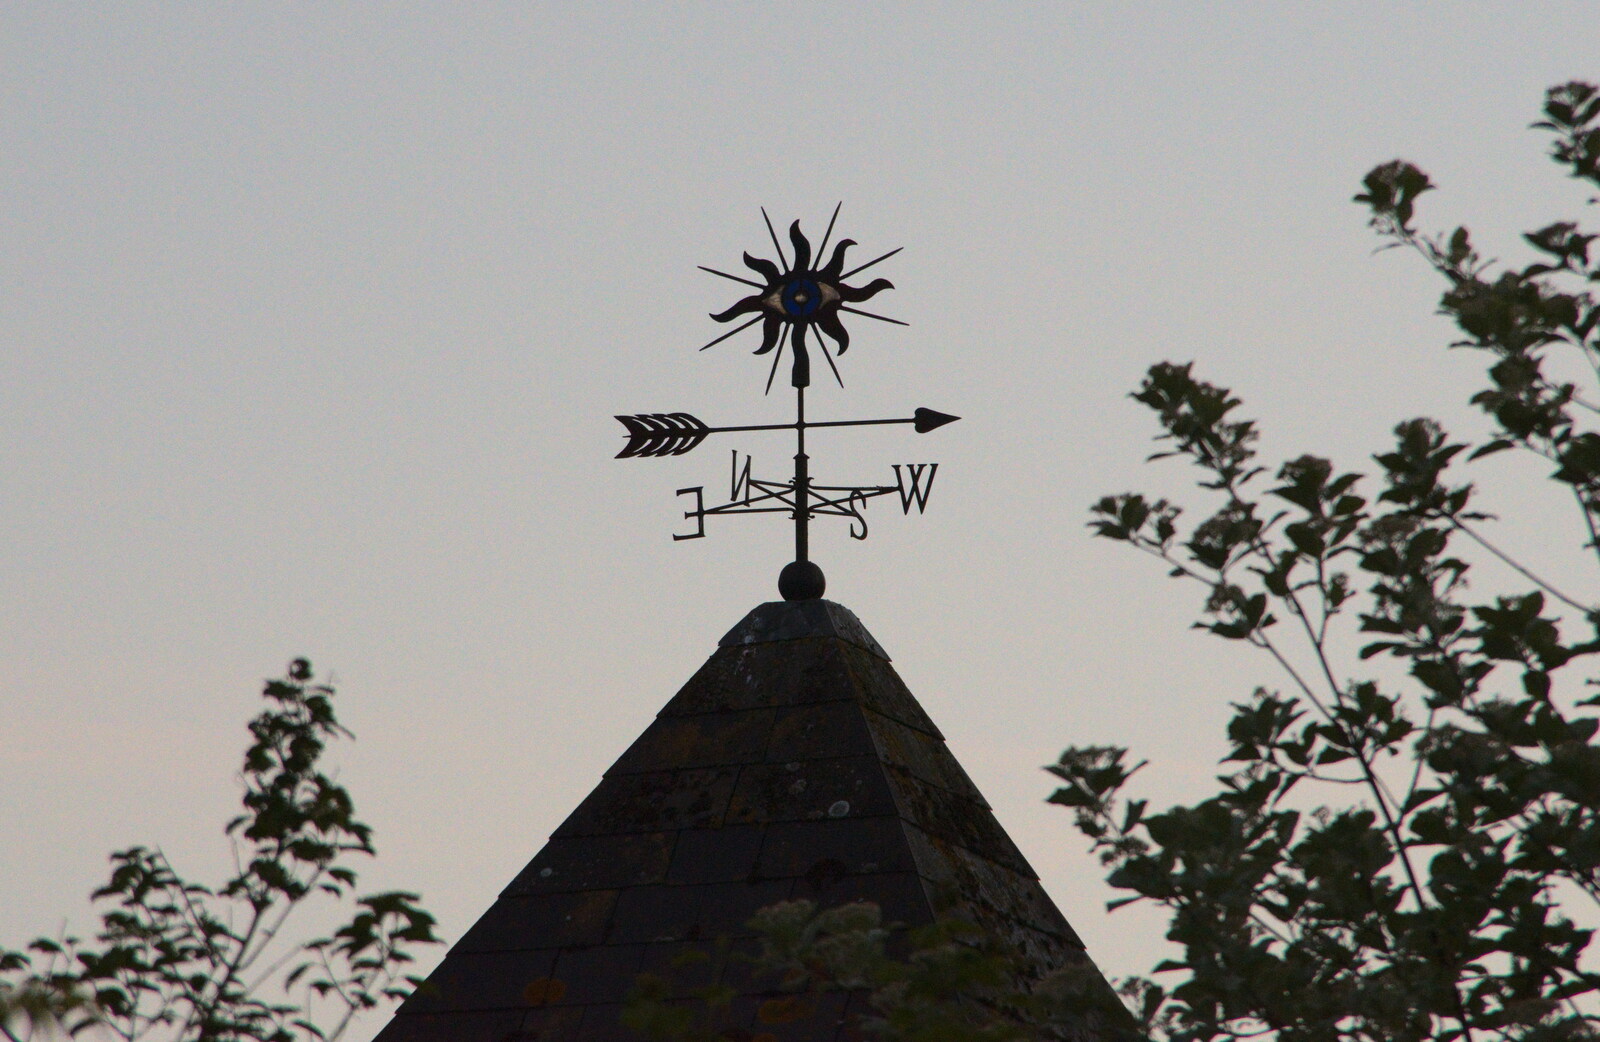 There's a cool weather-vane on the library from Ricochet at the Queen's Head, Eye, Suffolk - 26th May 2023